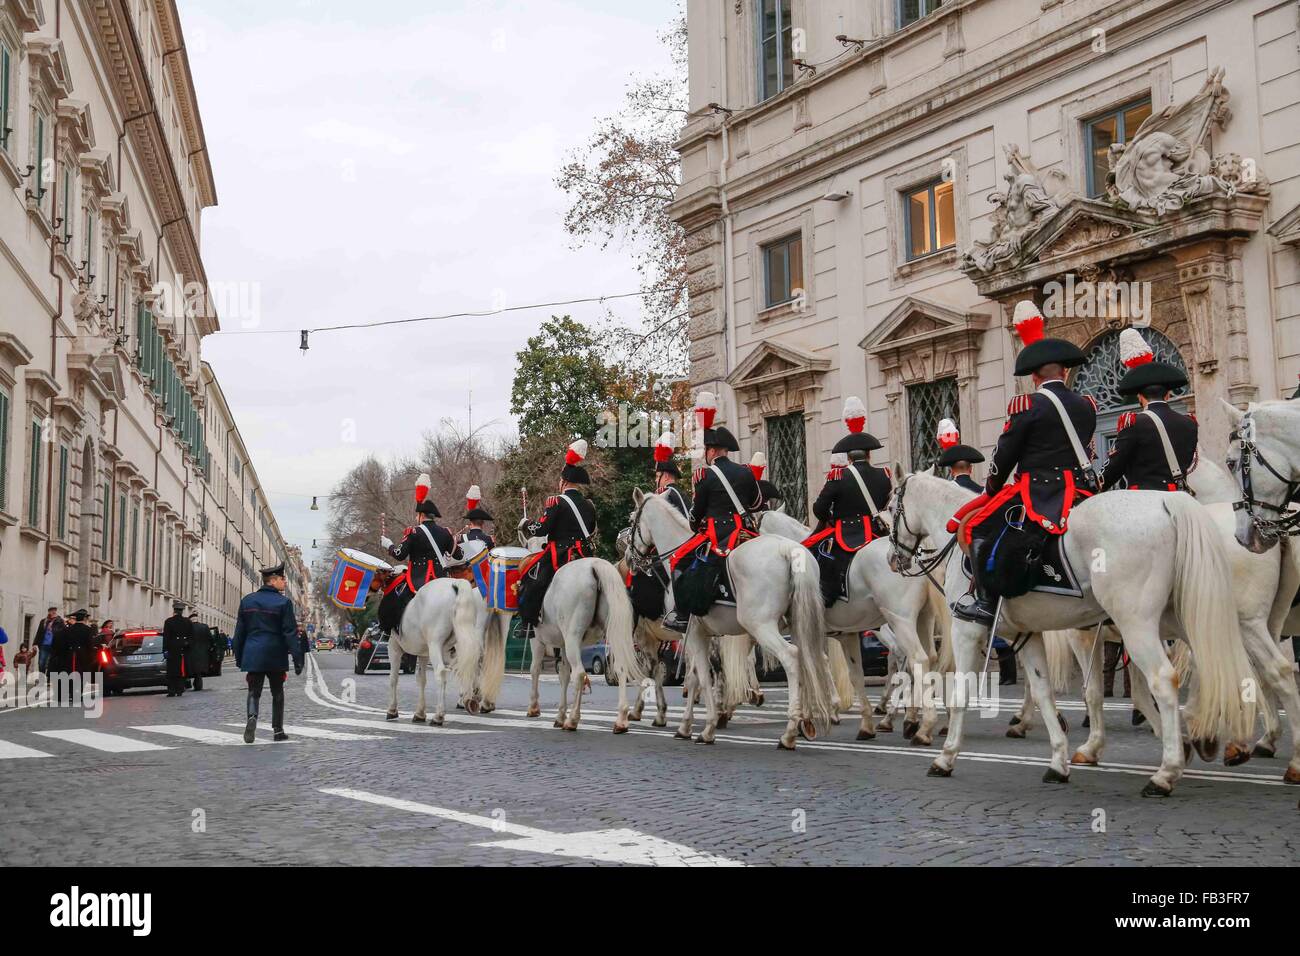 Rome, Italy. 07th Jan, 2016. 'Festa del Tricolore' is the officially national day in which the armed forces celebrate the Italian flag. 'Reggimento Corazzieri' and 'Fanfara' of the Carabinieri Cavalry IV Regiment parade in the solemn Changing of the guard at Quirinal square. © Davide Fracassi/Pacific Press/Alamy Live News Stock Photo